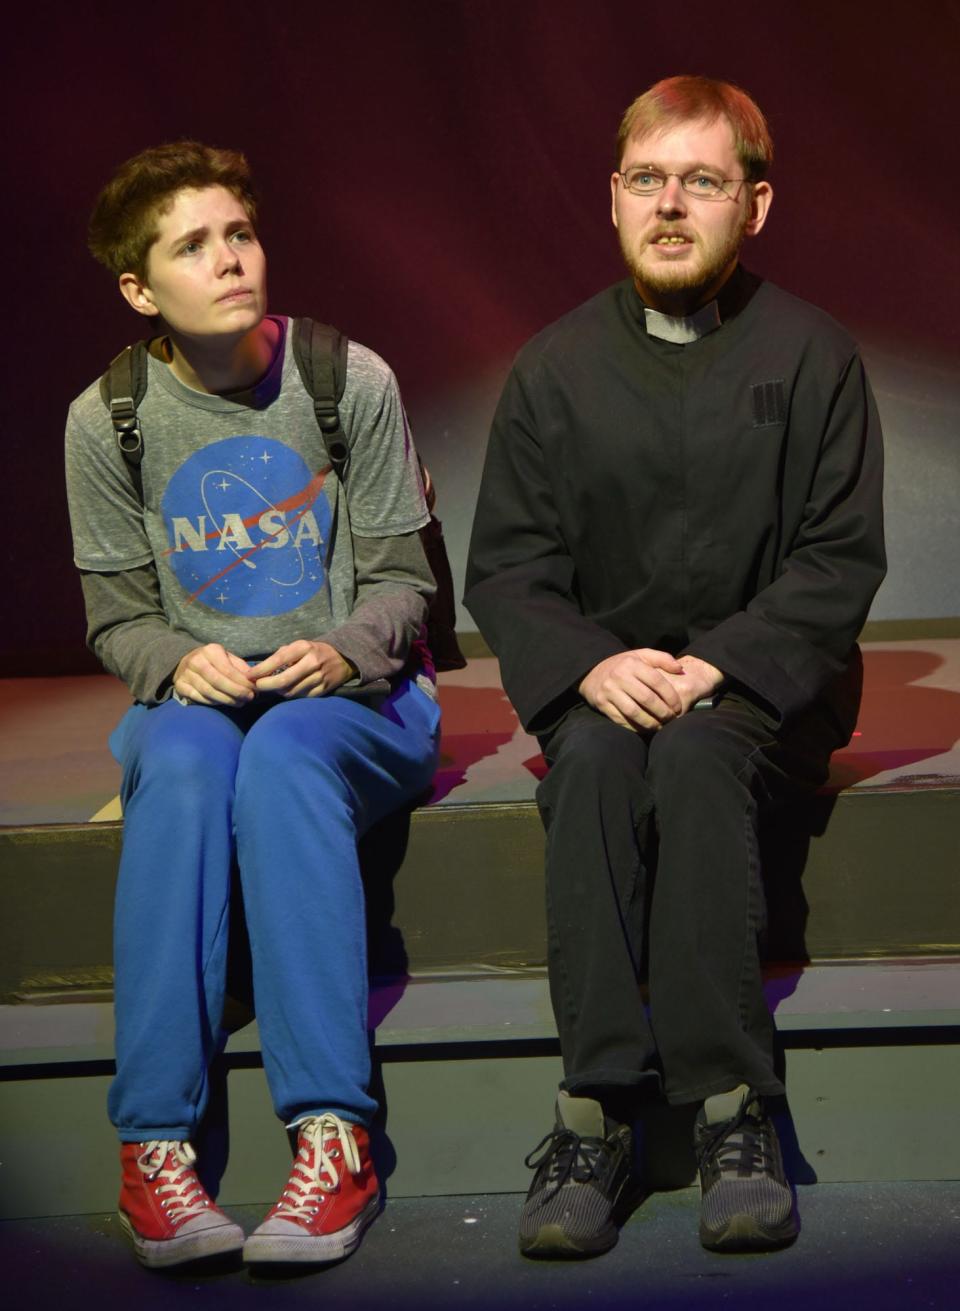 Big Dawg Productions hosts the play "The Curious Incident of the Dog in the Night-Time" at Thalian Hall.